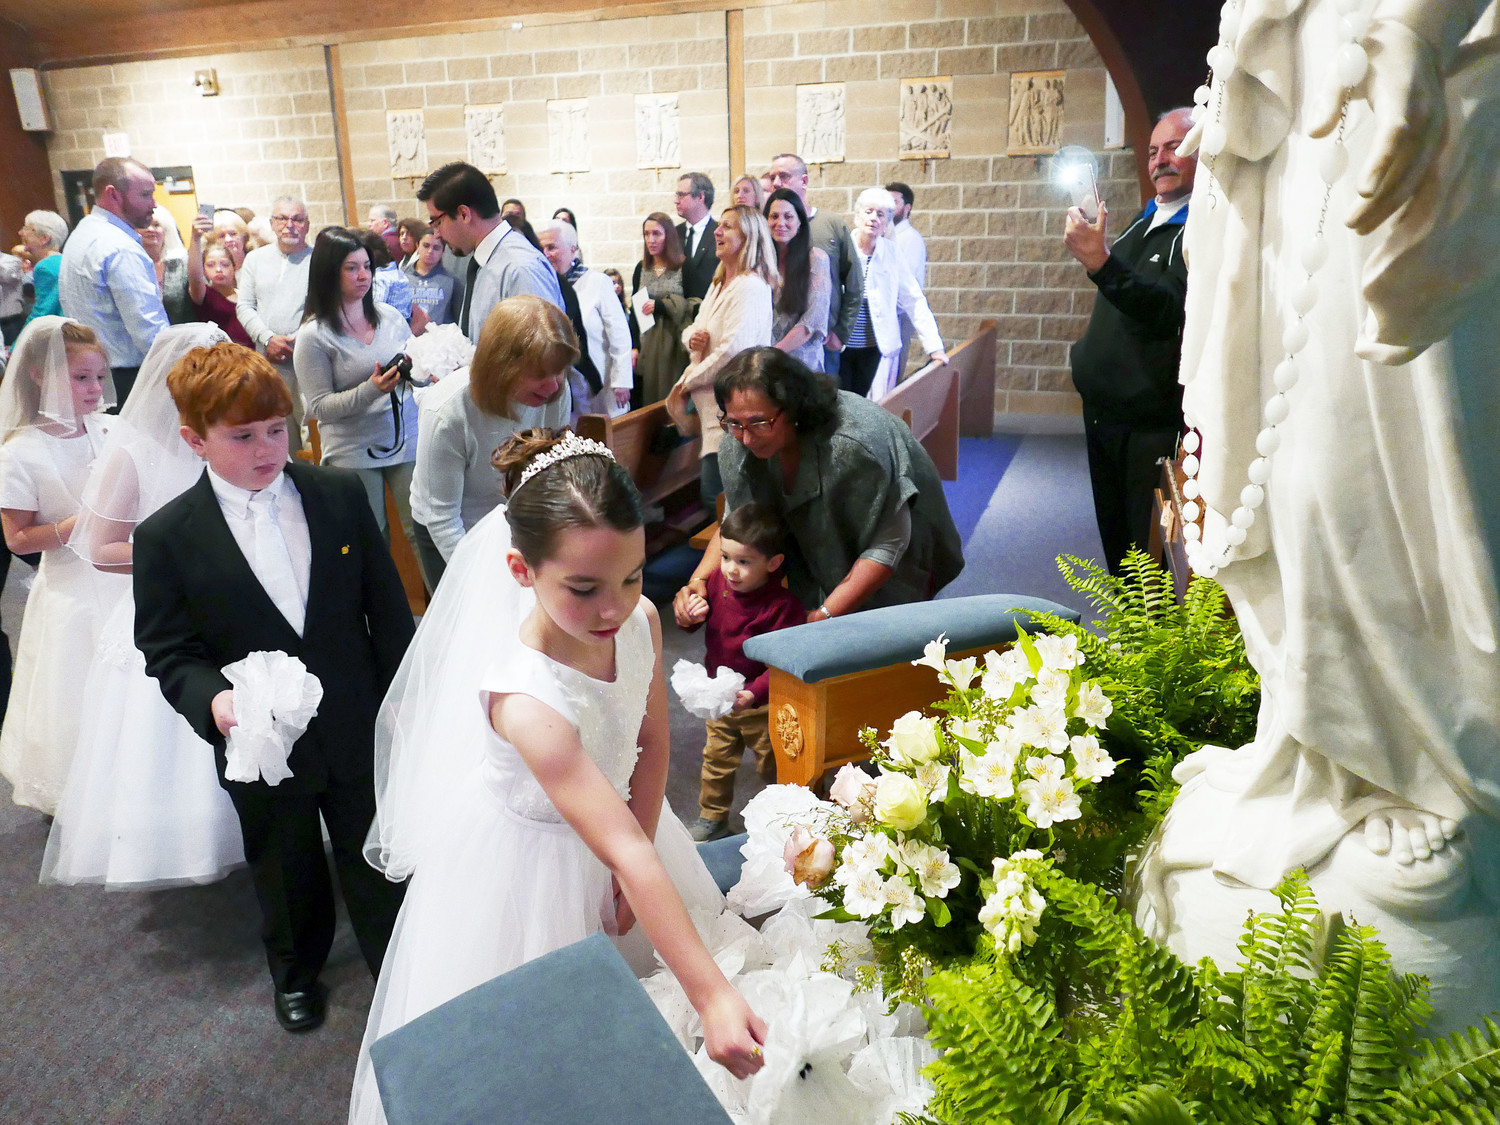 Kayleigh Mahoney, who along with her classmates received the sacrament of First Holy Communion May 5, places a flower at the base of a statue of the Blessed Mother at Immaculate Conception Church in Stony Point during a May Crowning ceremony on Mothers’ Day, May 13.